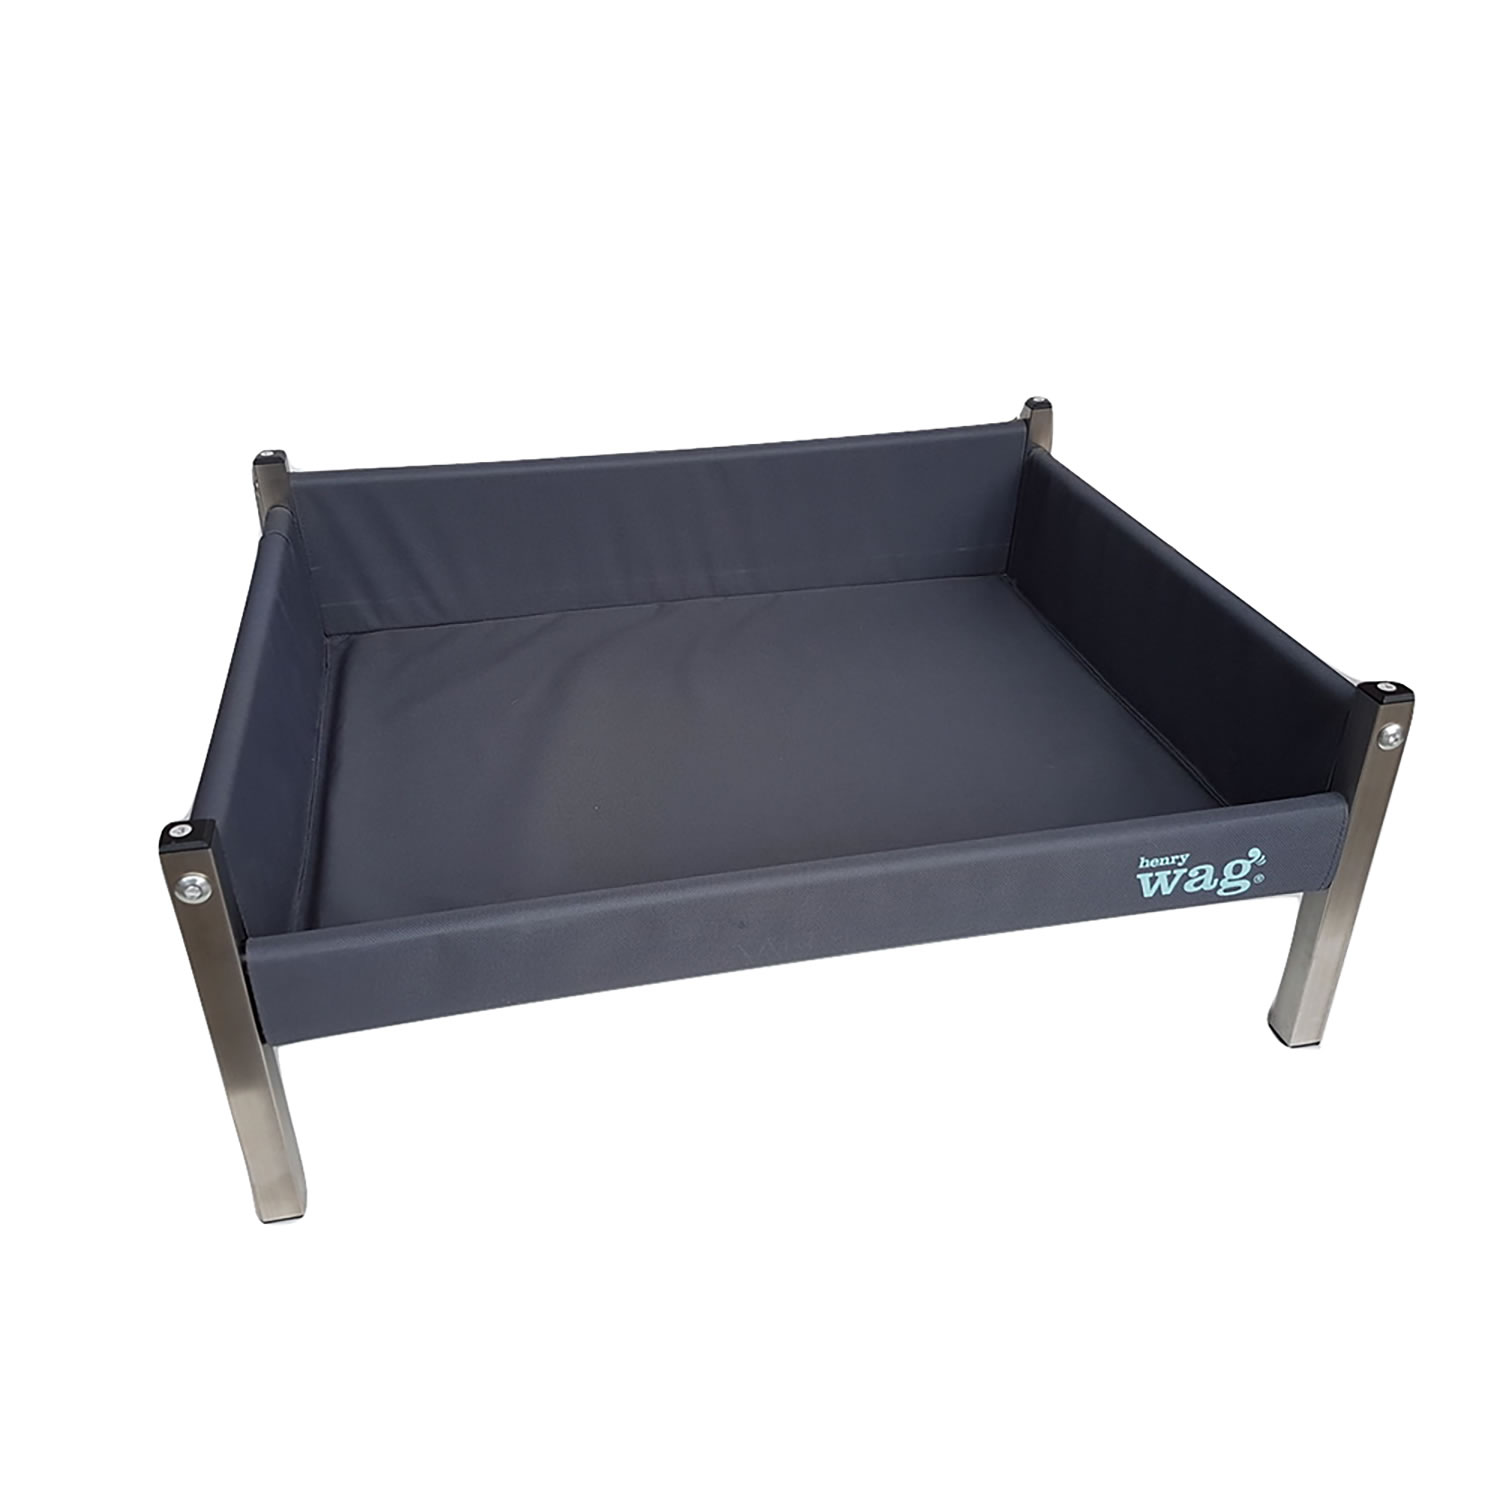 HENRY WAG ELEVATED DOG BED SMALL